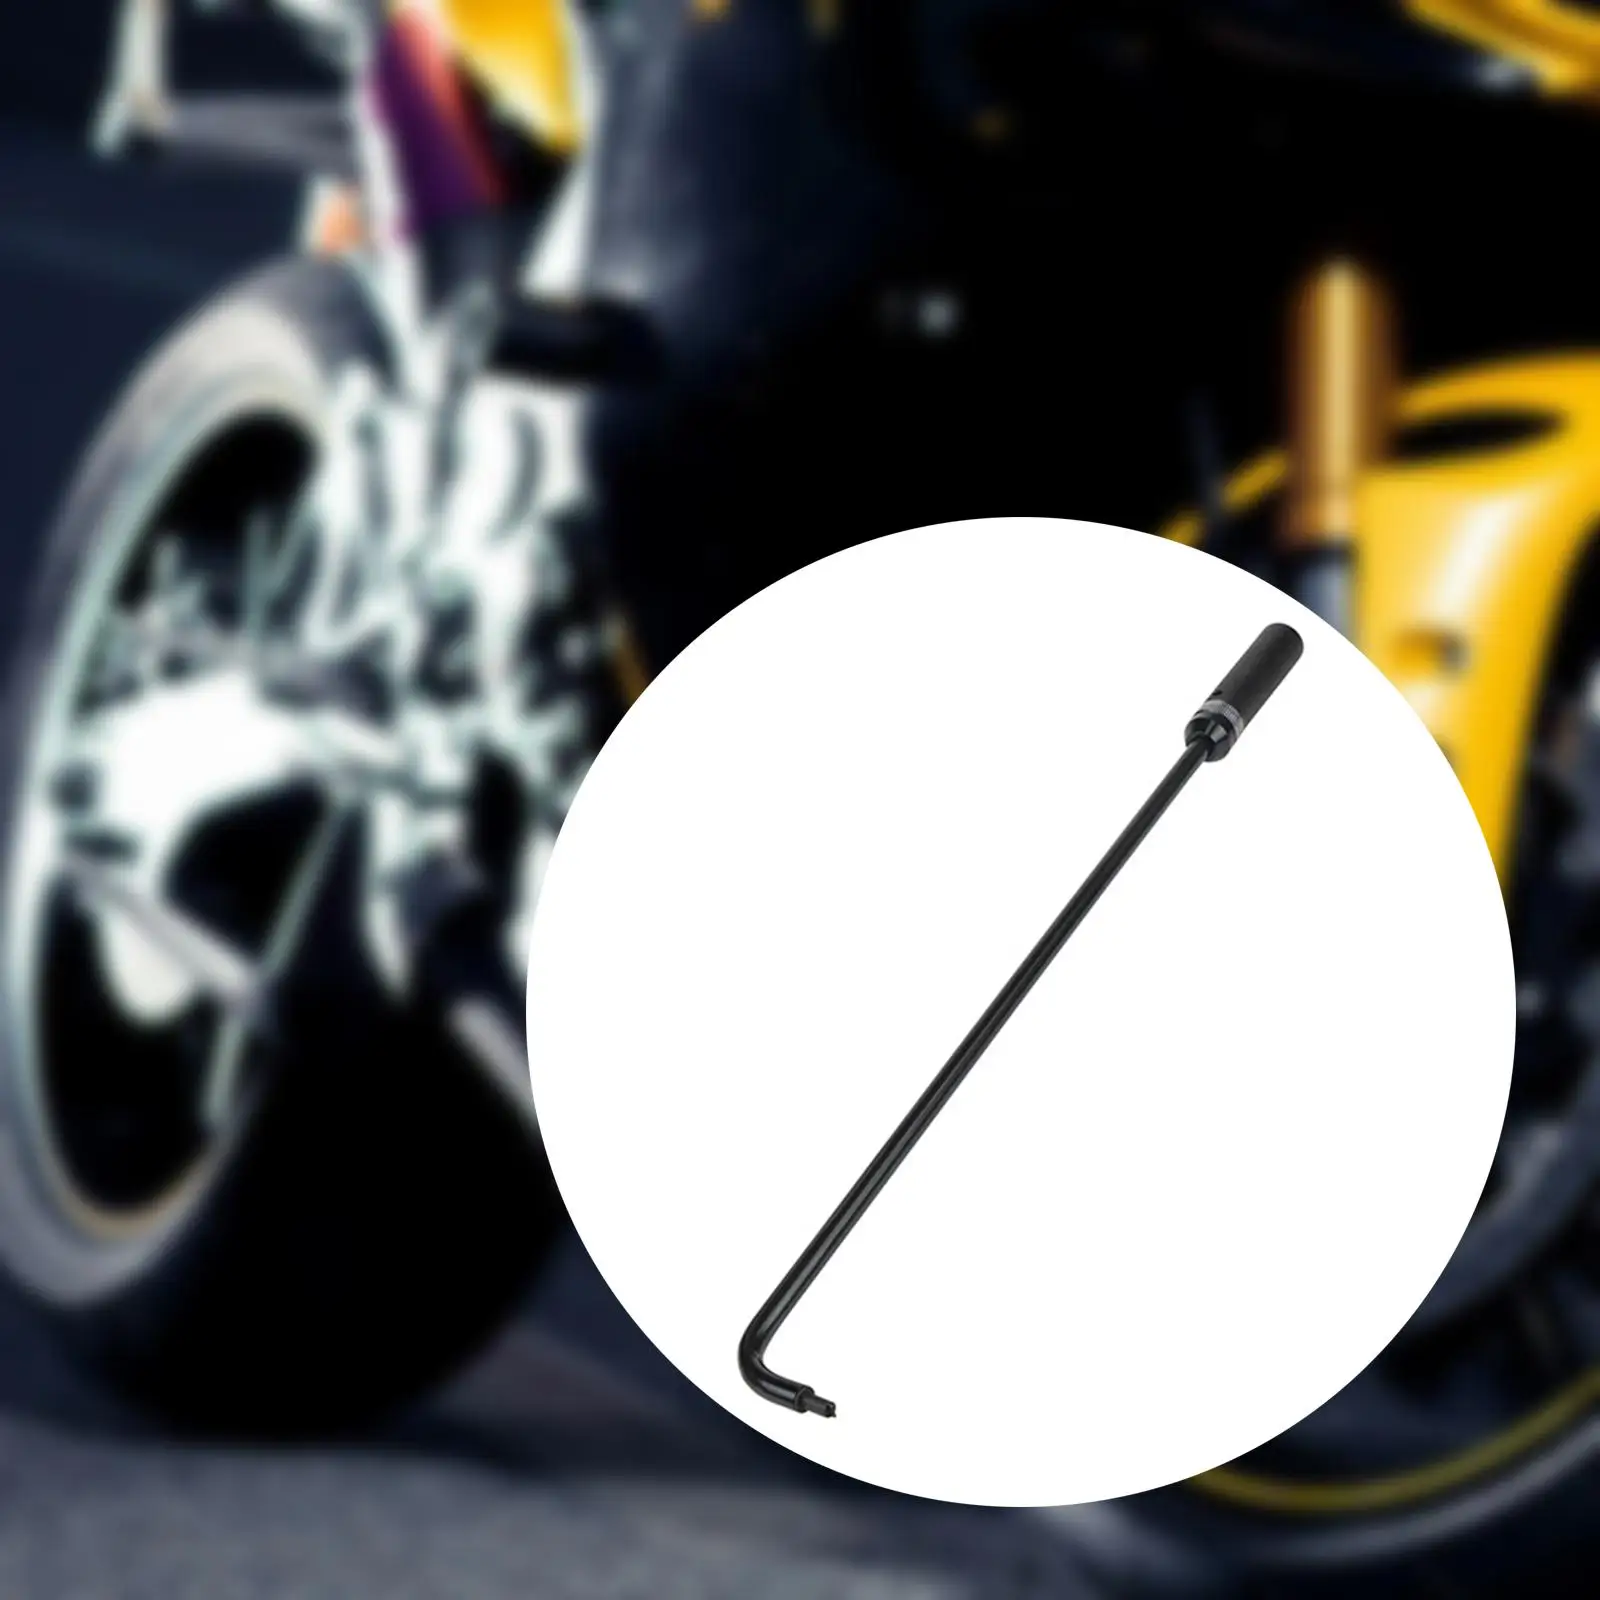 Motorcycle Pilot Screw Adjustment Tool Length 42cm 110° Angled Head Universal Accessories for Multi Cylinder Motorcycles Sturdy